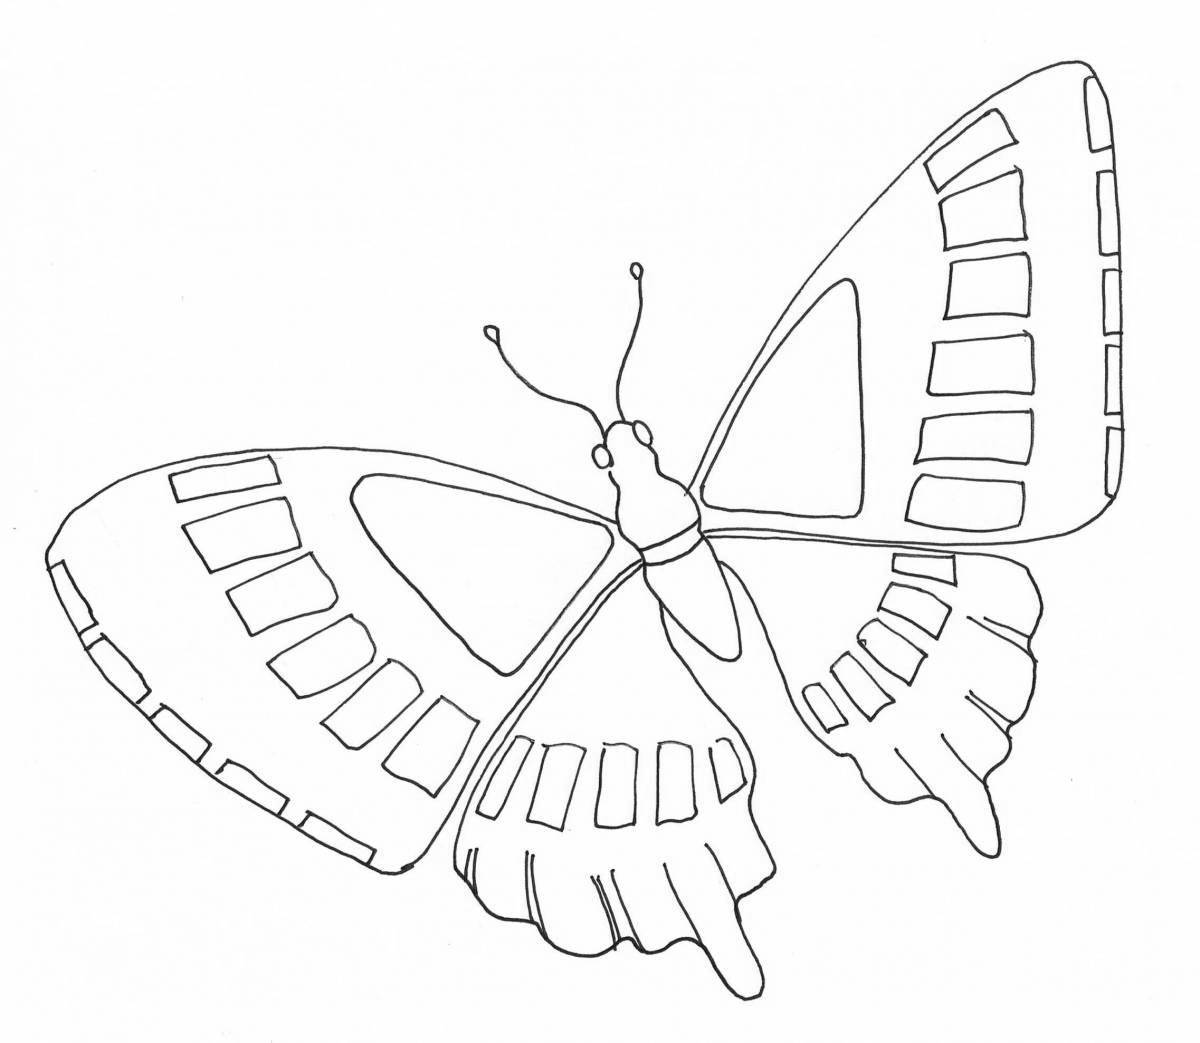 Exquisite swallowtail butterfly coloring page